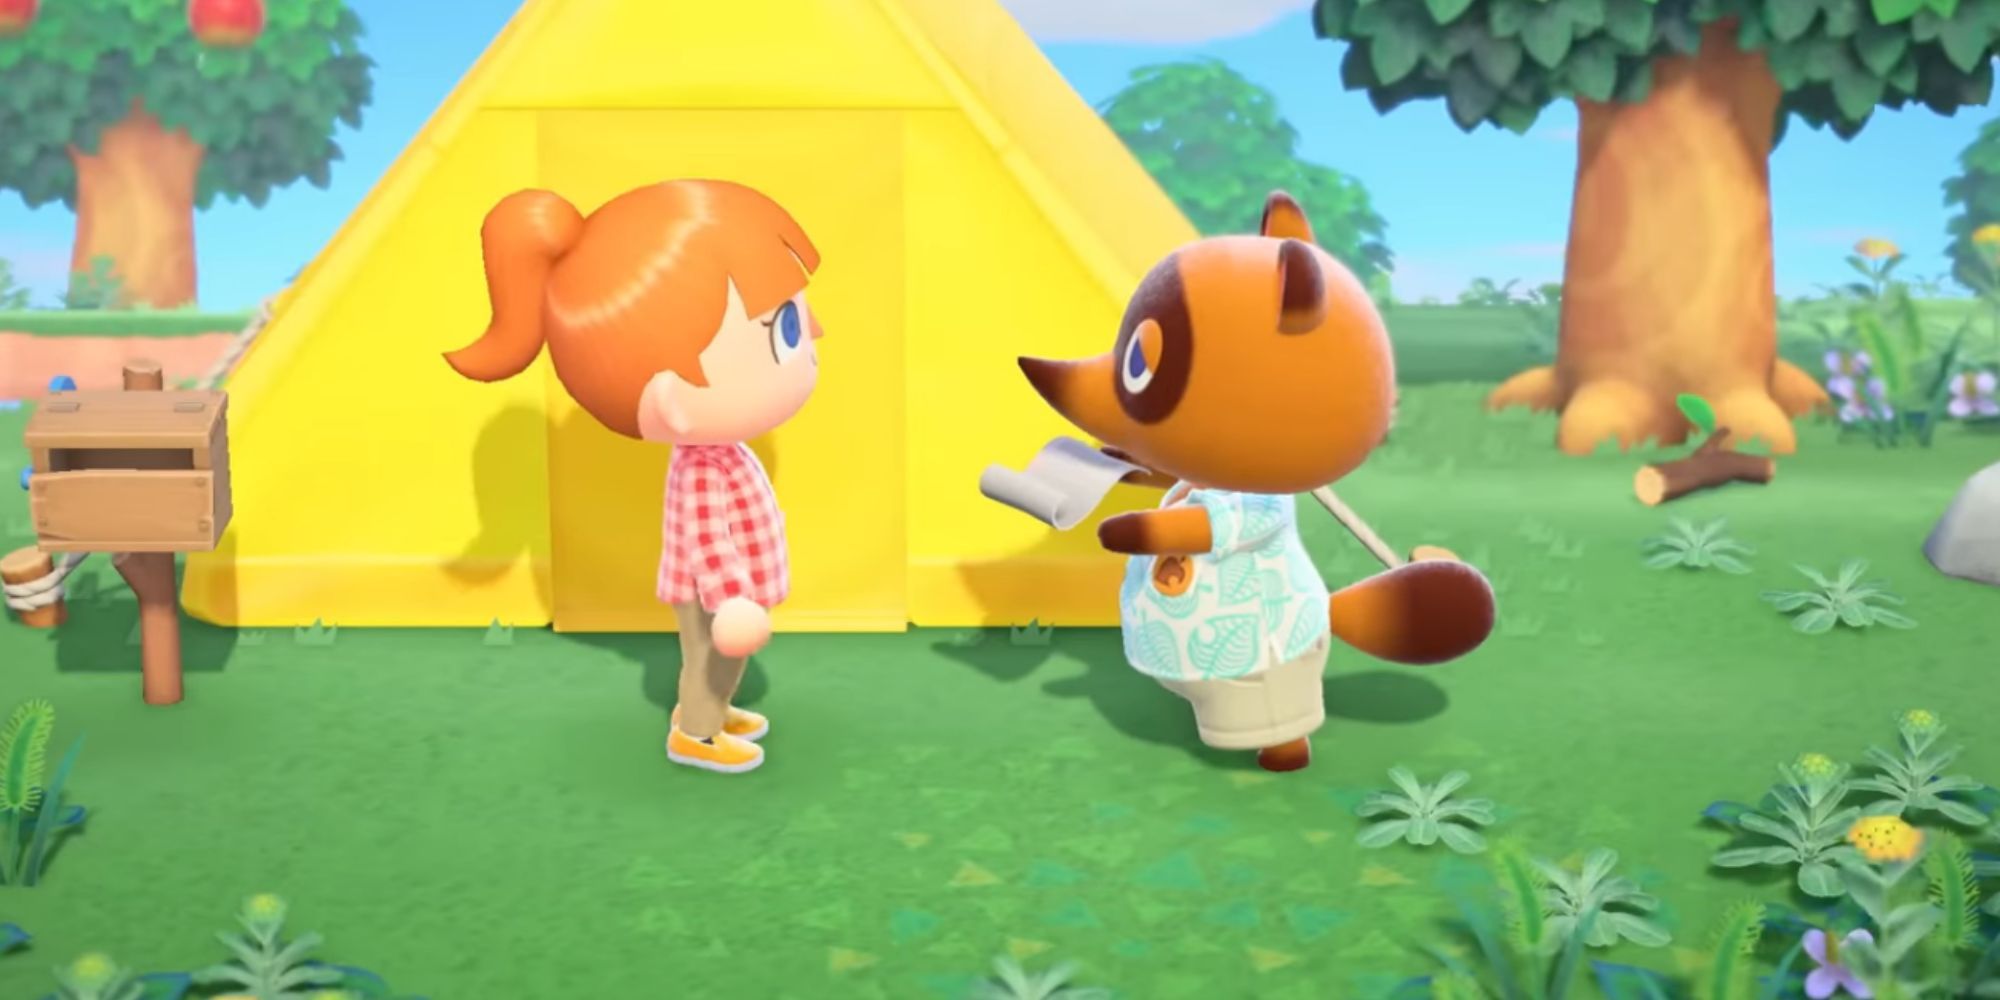 Nook handing documents to a villager in front of a tent